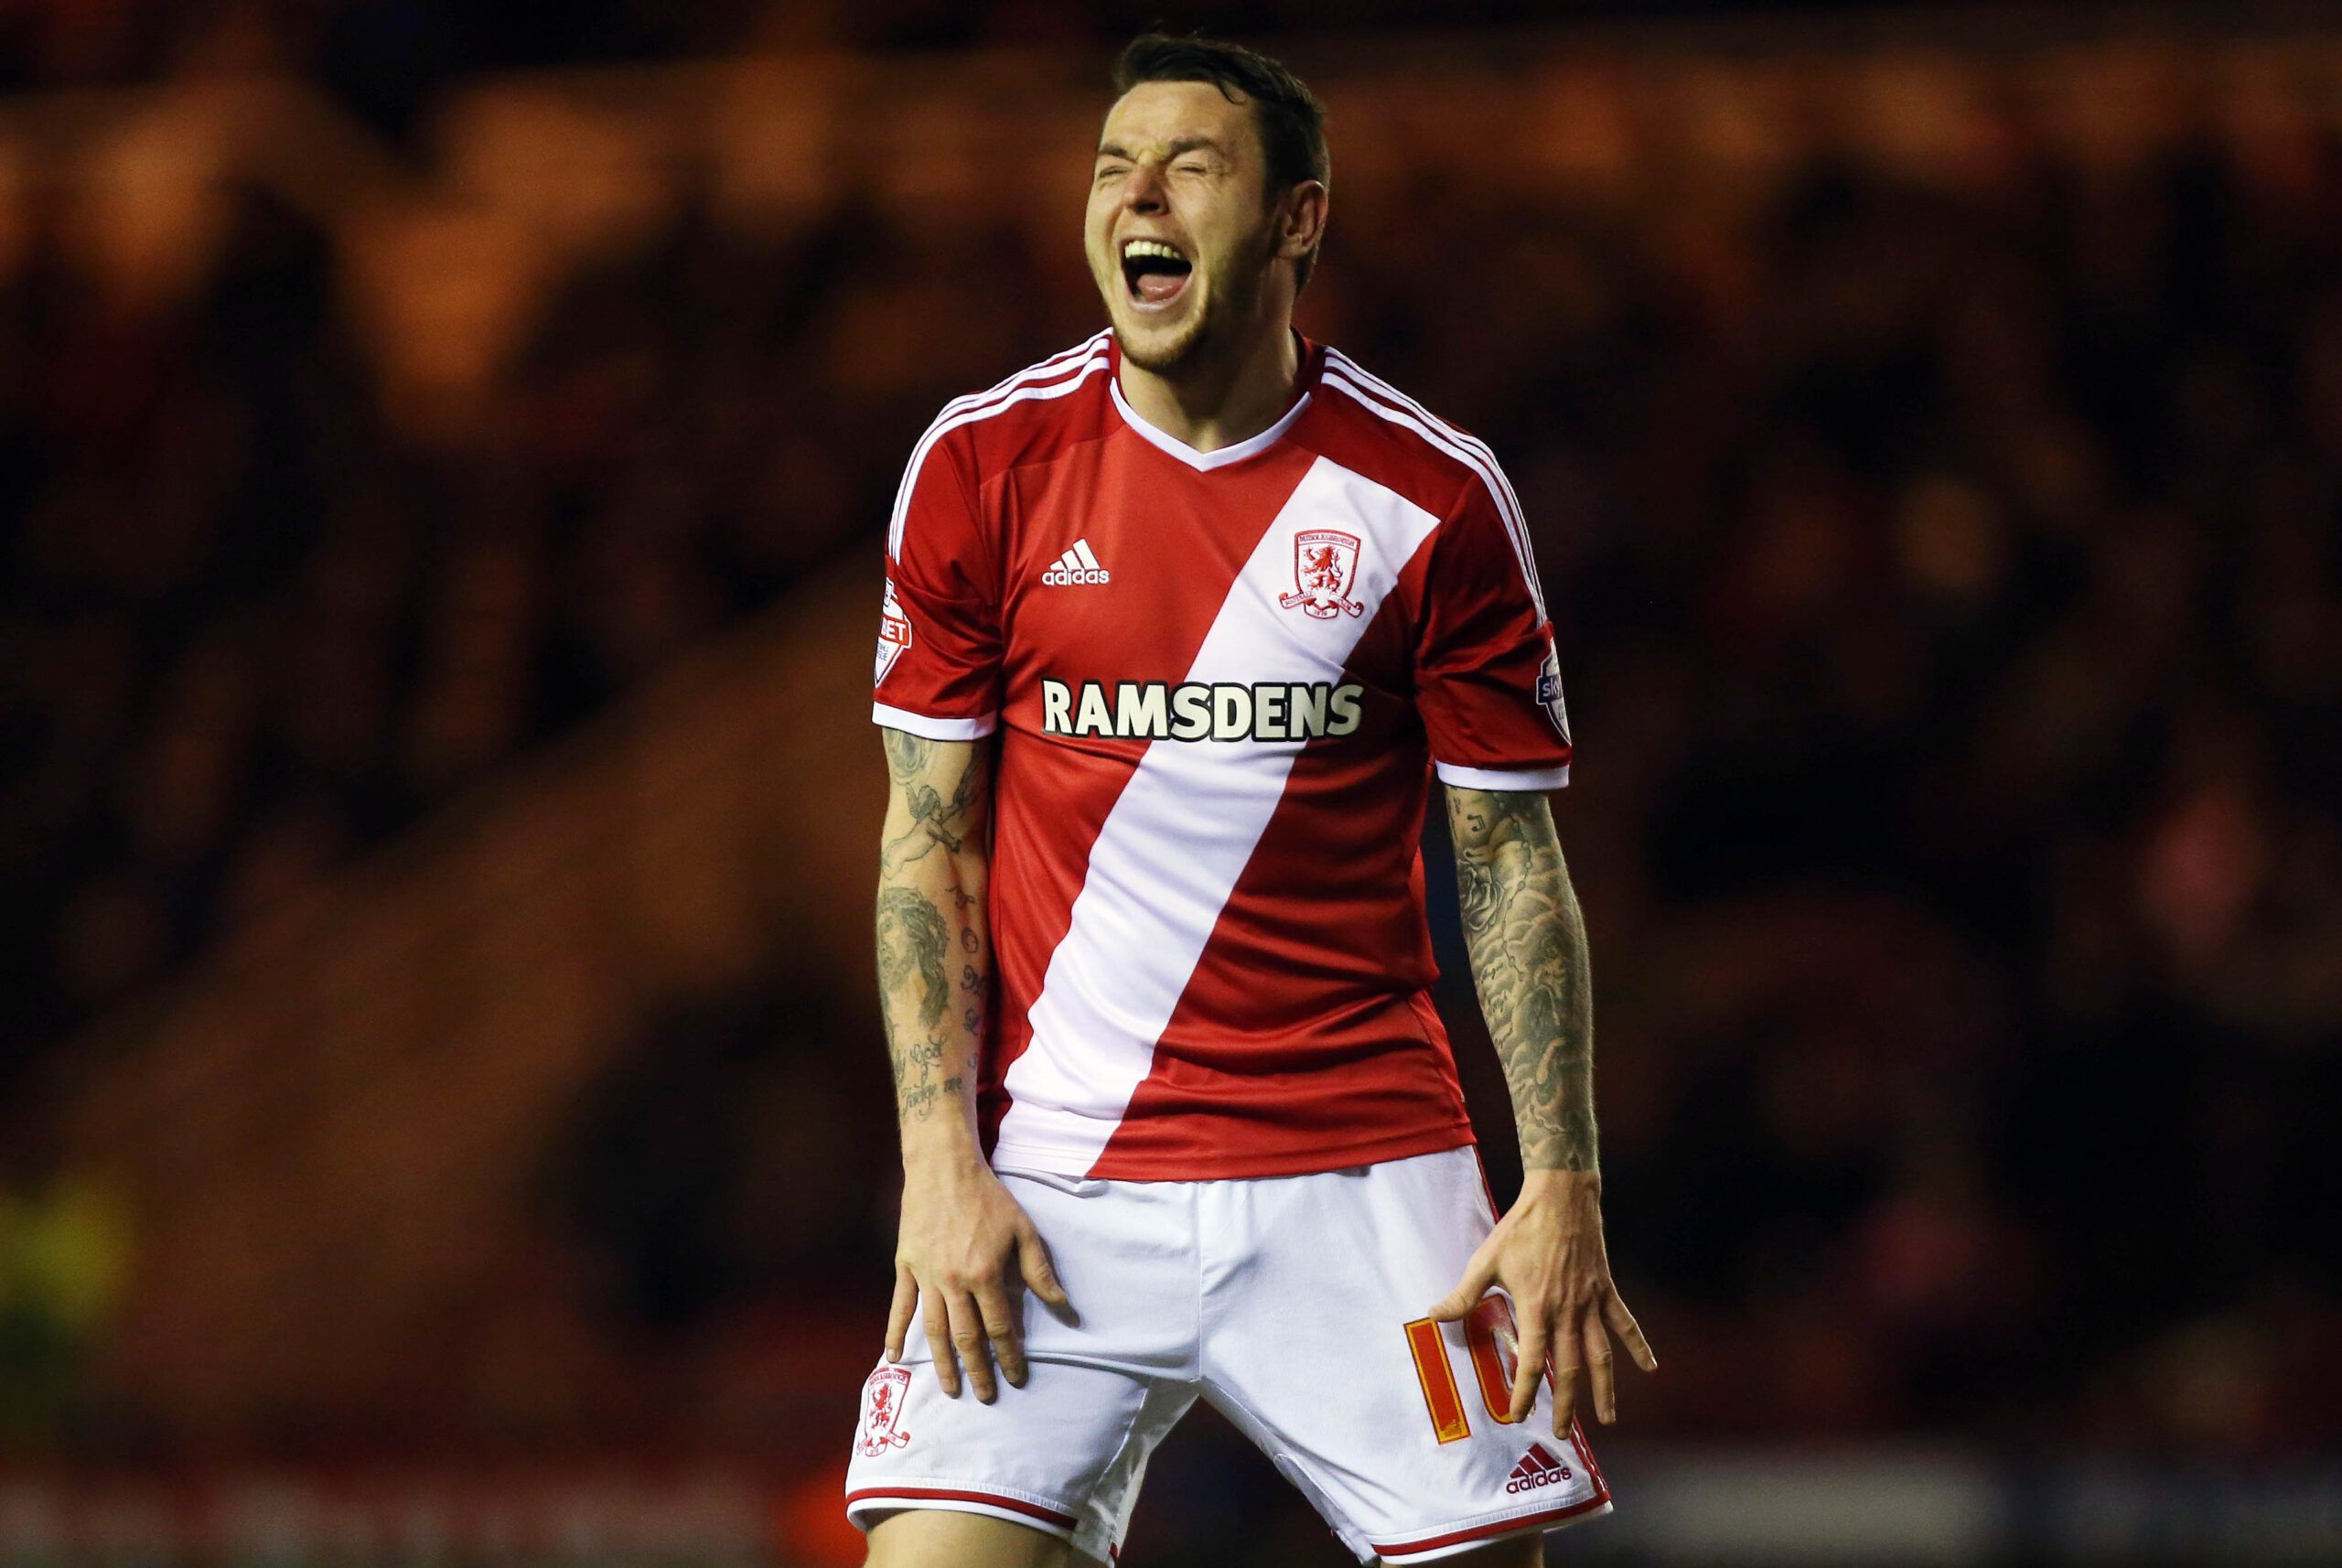 Football - Middlesbrough v Millwall - Sky Bet Football League Championship - The Riverside Stadium - 3/3/15 
Middlesbrough's Lee Tomlin reacts after a missed chance 
Mandatory Credit: Action Images / Lee Smith 
Livepic 
EDITORIAL USE ONLY. No use with unauthorized audio, video, data, fixture lists, club/league logos or 